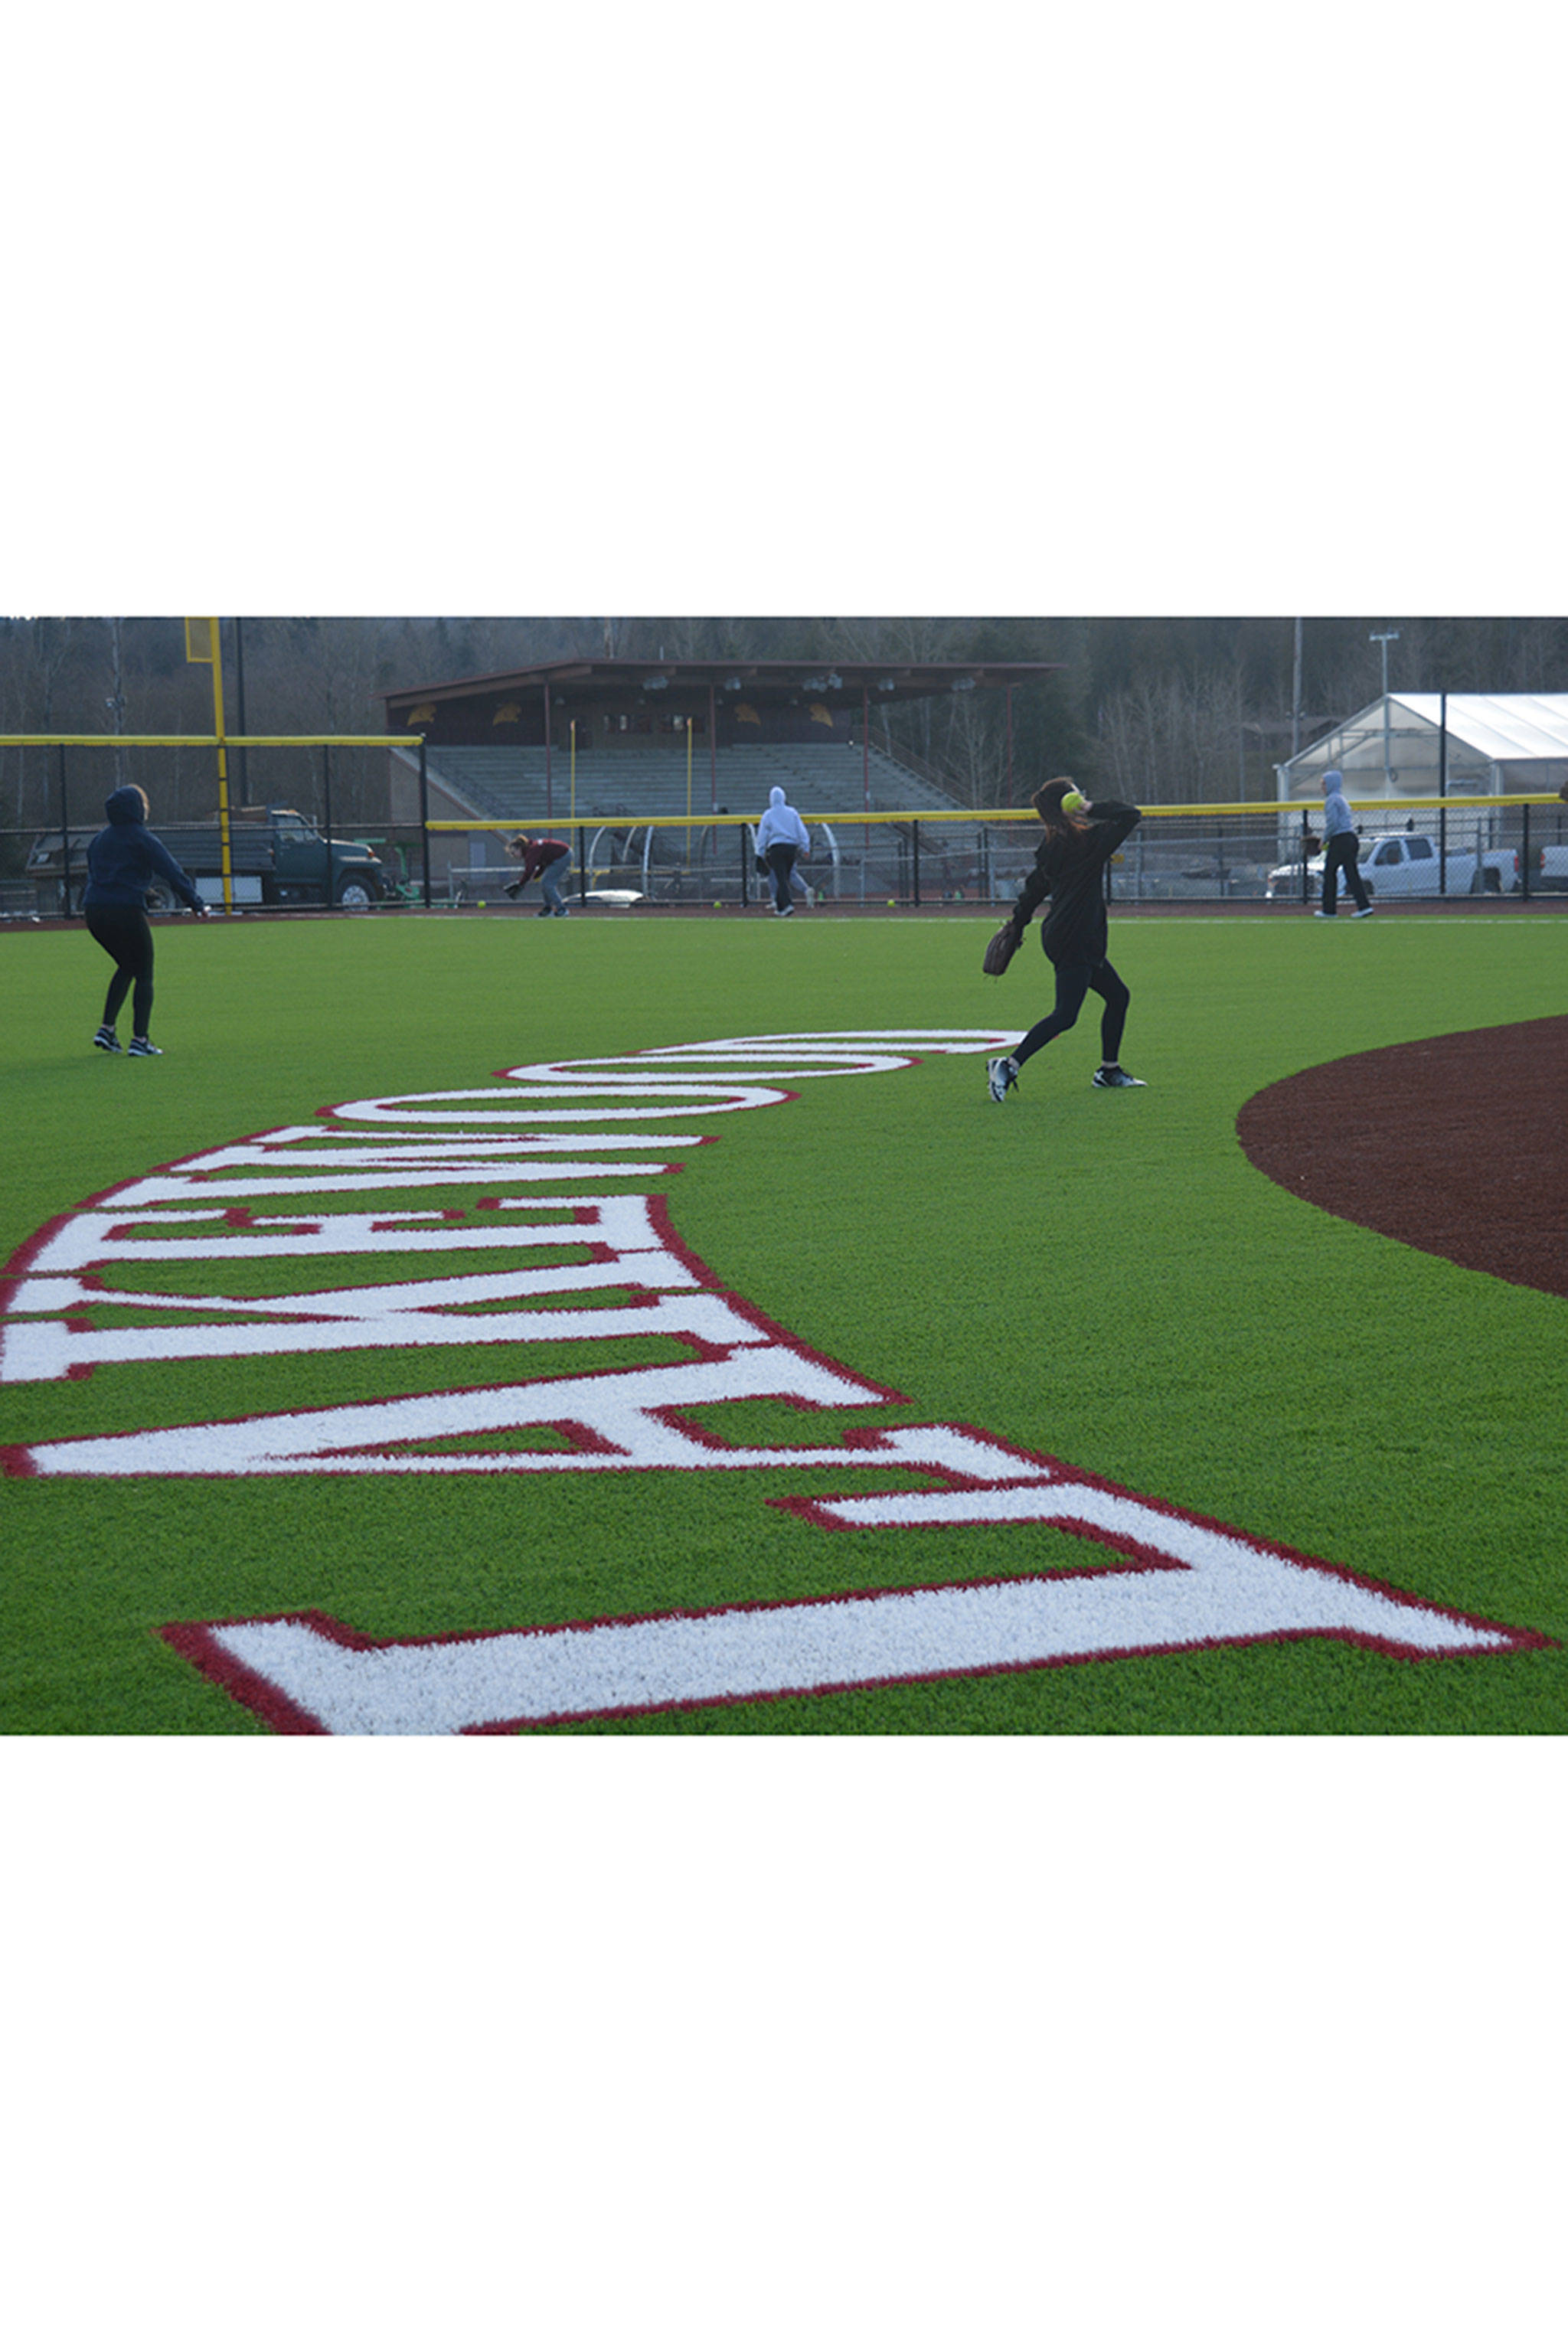 Lakewood soon to have 2 Fields of Dreams (slide show)